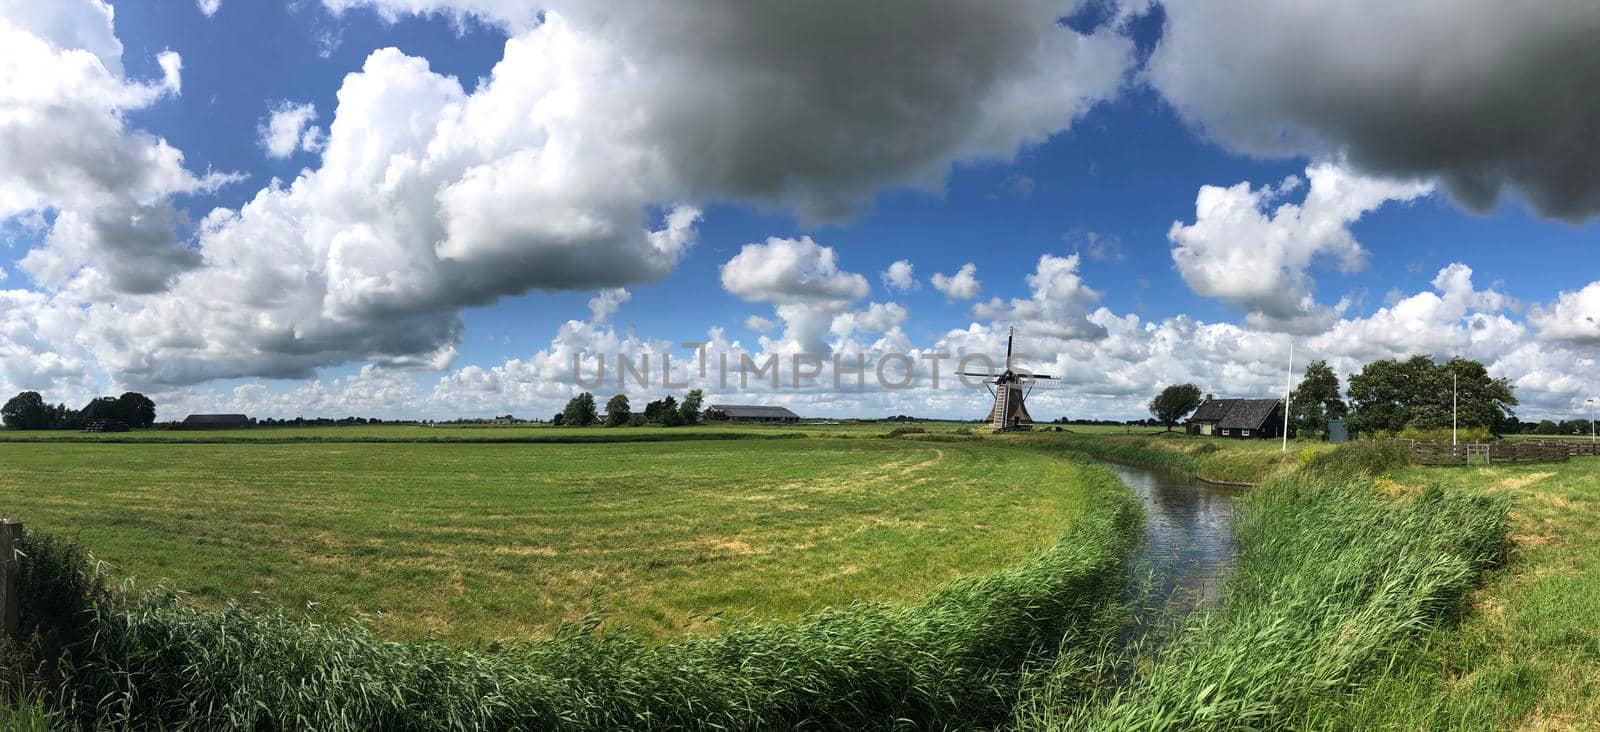 Panorama from a windmill in Winsum, Friesland The Netherlands